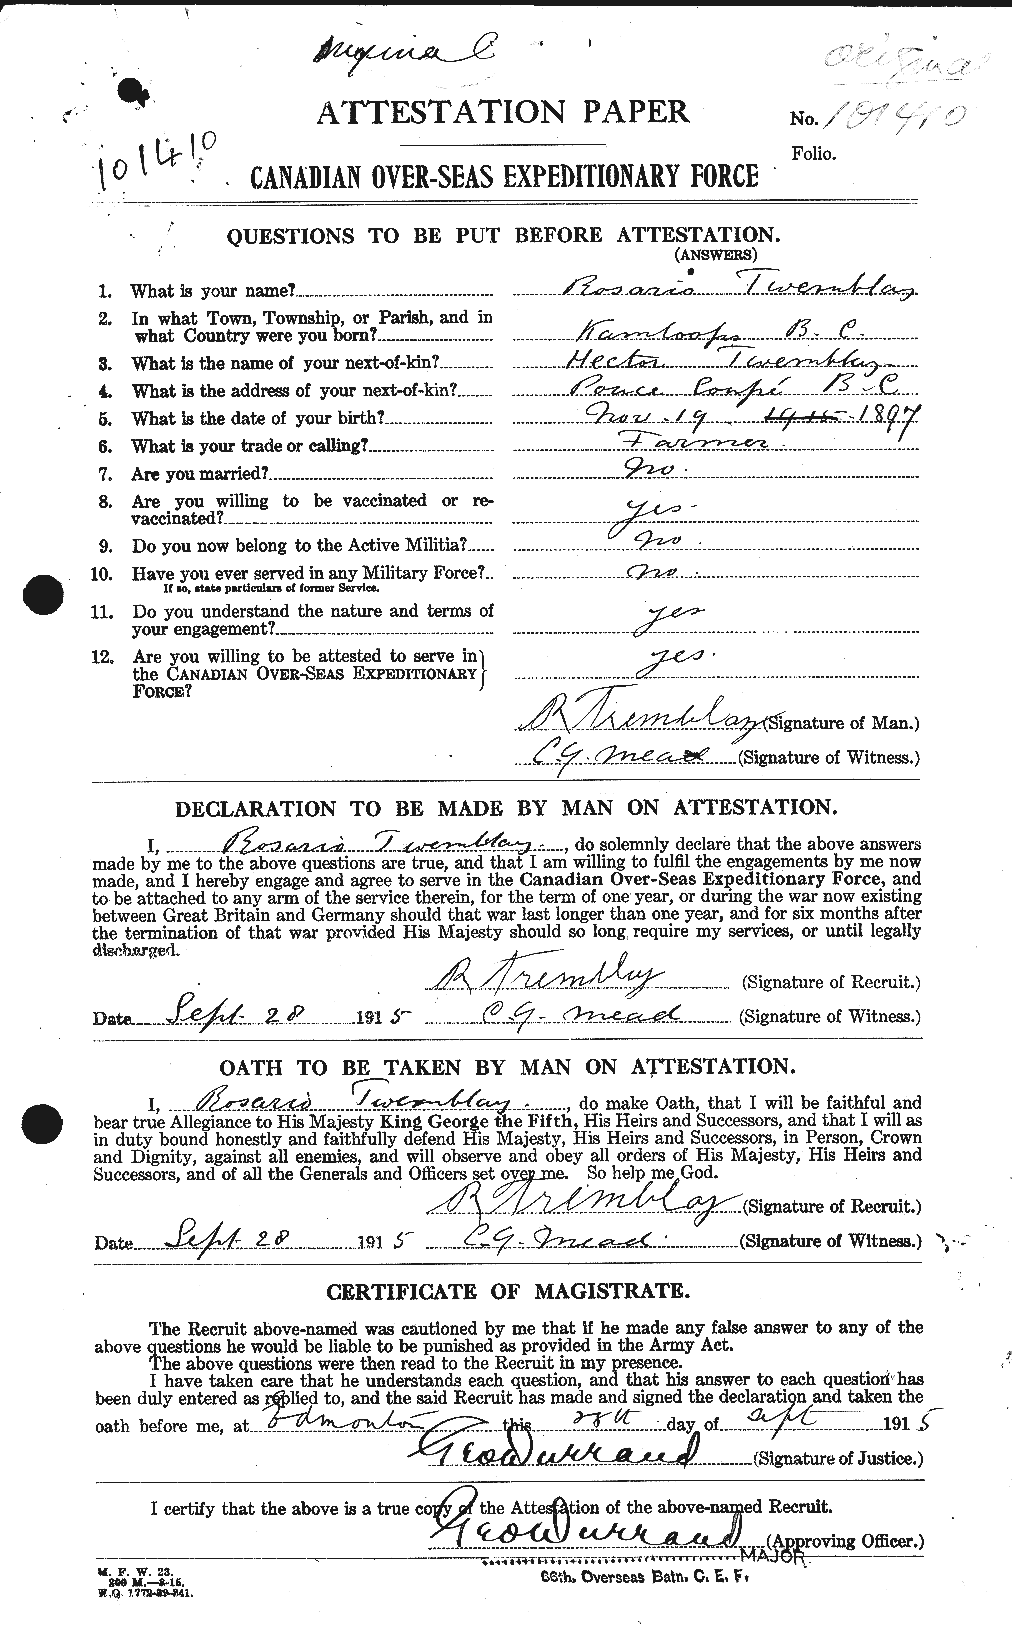 Personnel Records of the First World War - CEF 638303a